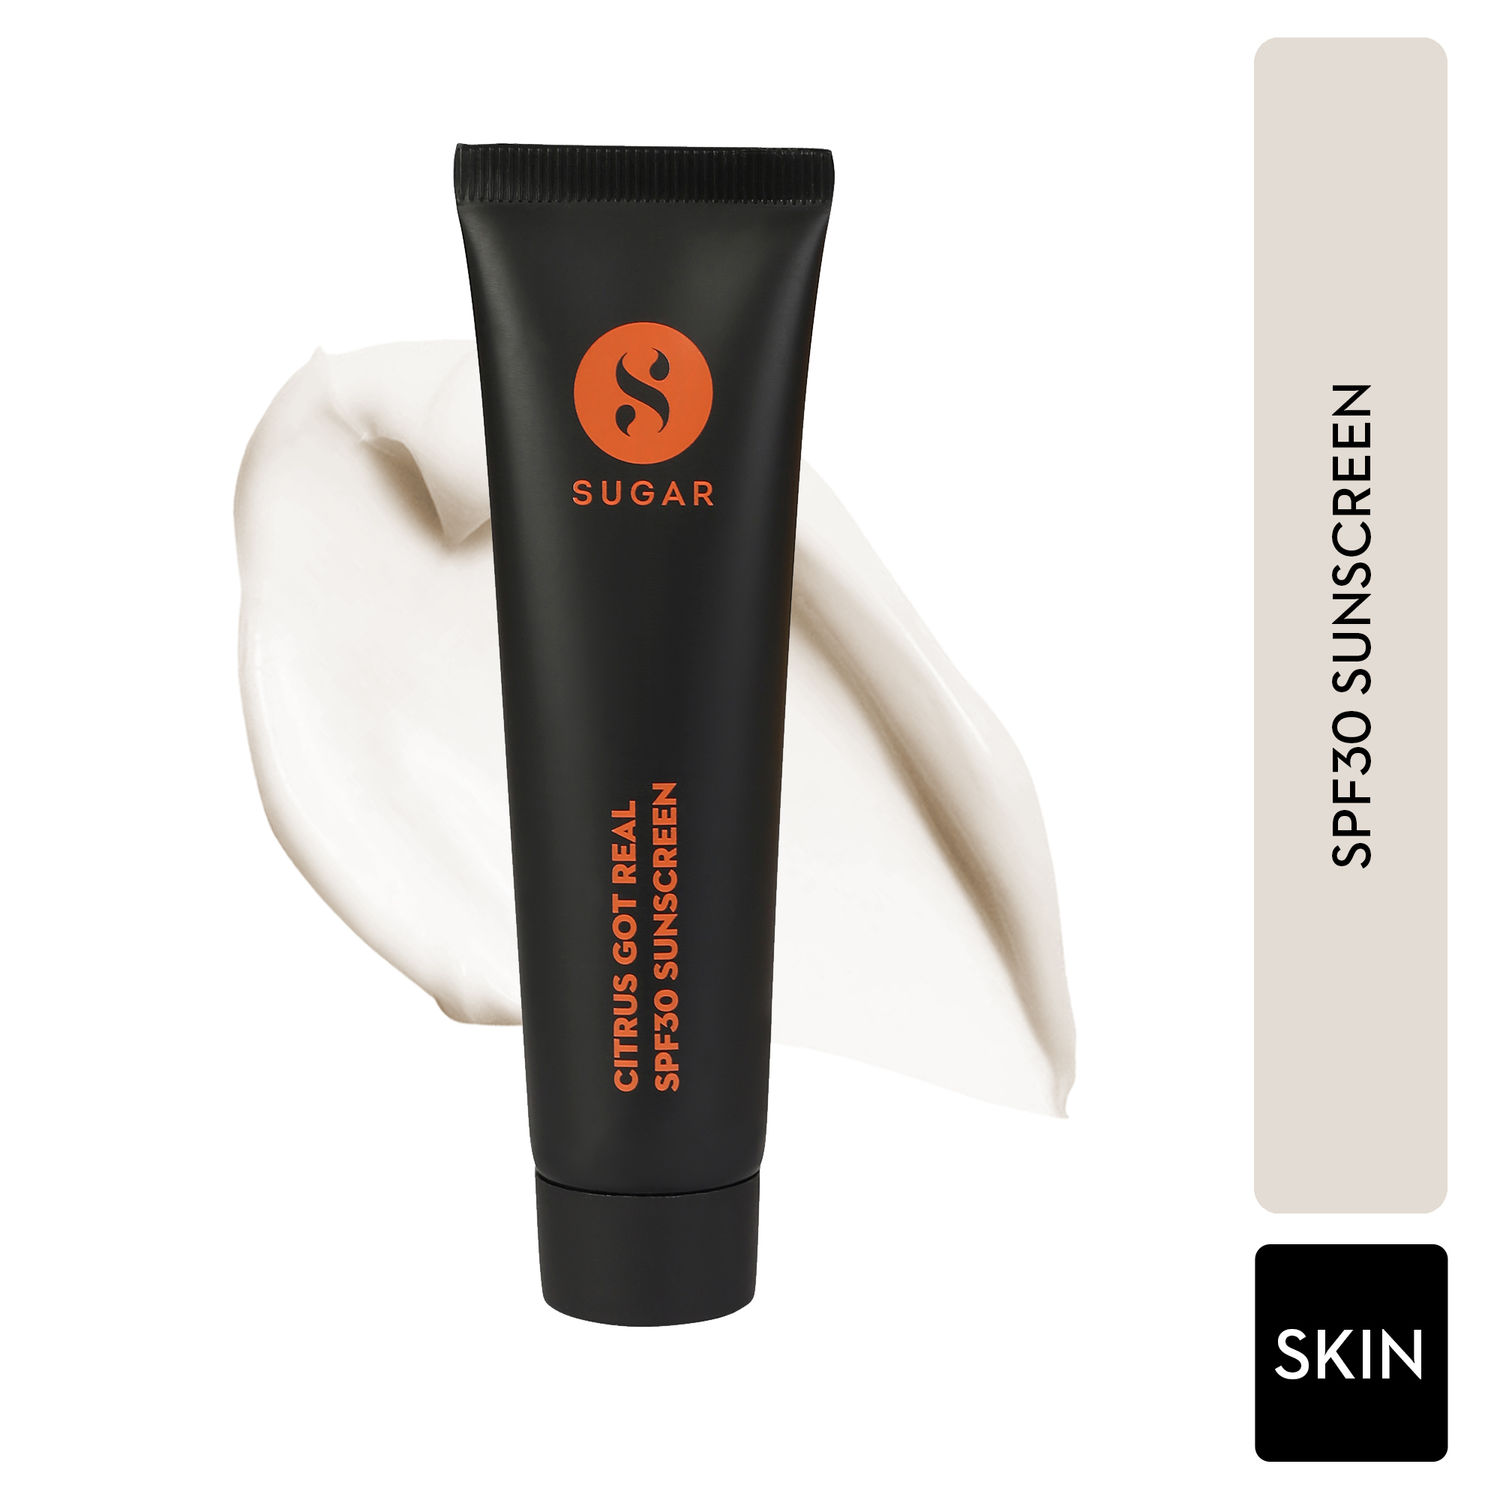 Buy SUGAR Cosmetics - Citrus Got Real - Sunscreen with SPF 30 - 30 g - Enriched with Vitamin C - Brightens Skin and Protects Skin From Harmful Rays - Purplle